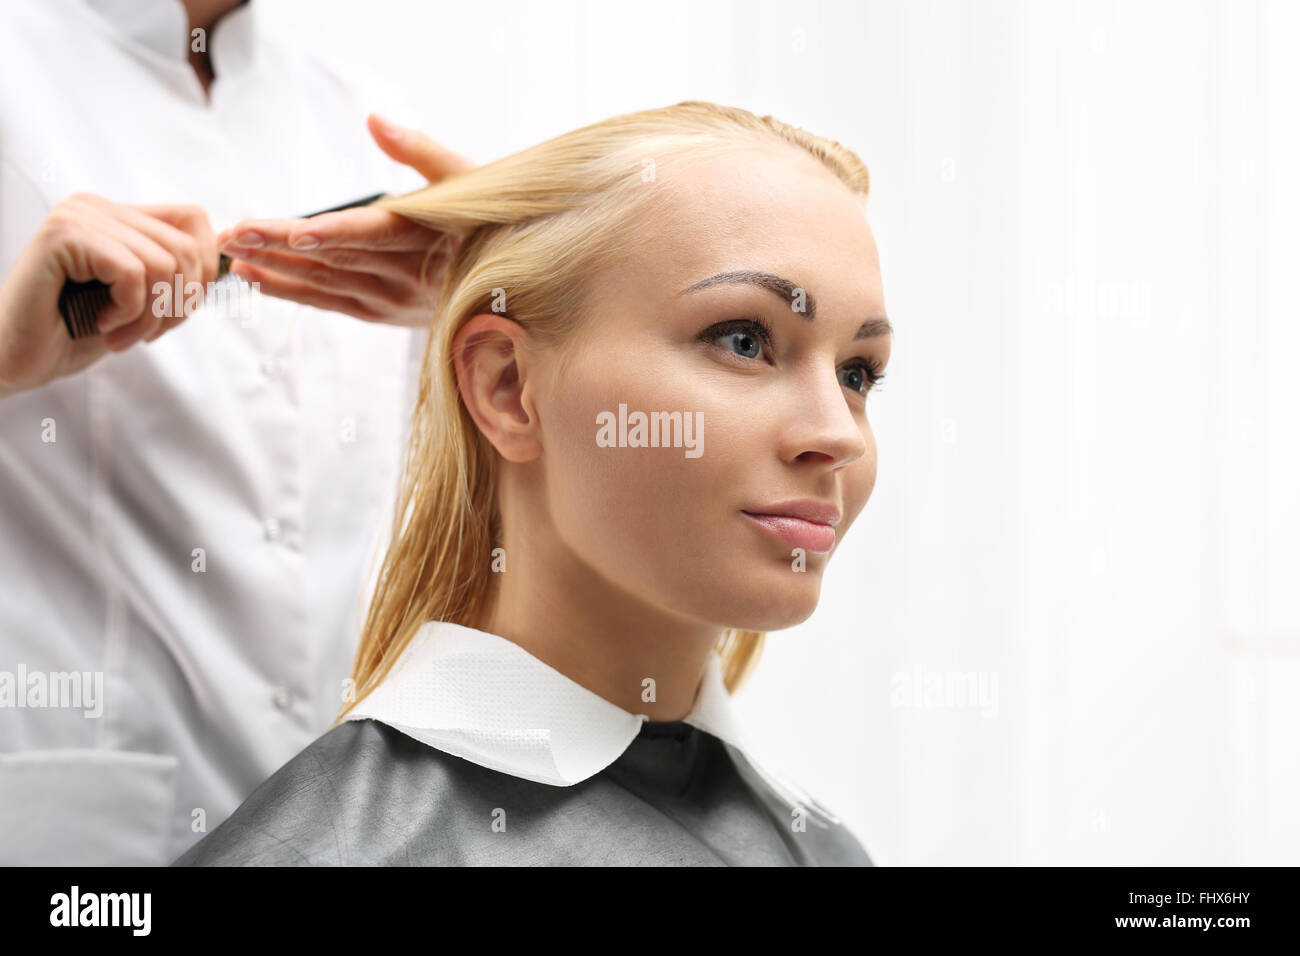 Medium-length hair, the woman at the hairdresser. Combing hair. The woman in the chair barber styling during surgery Stock Photo